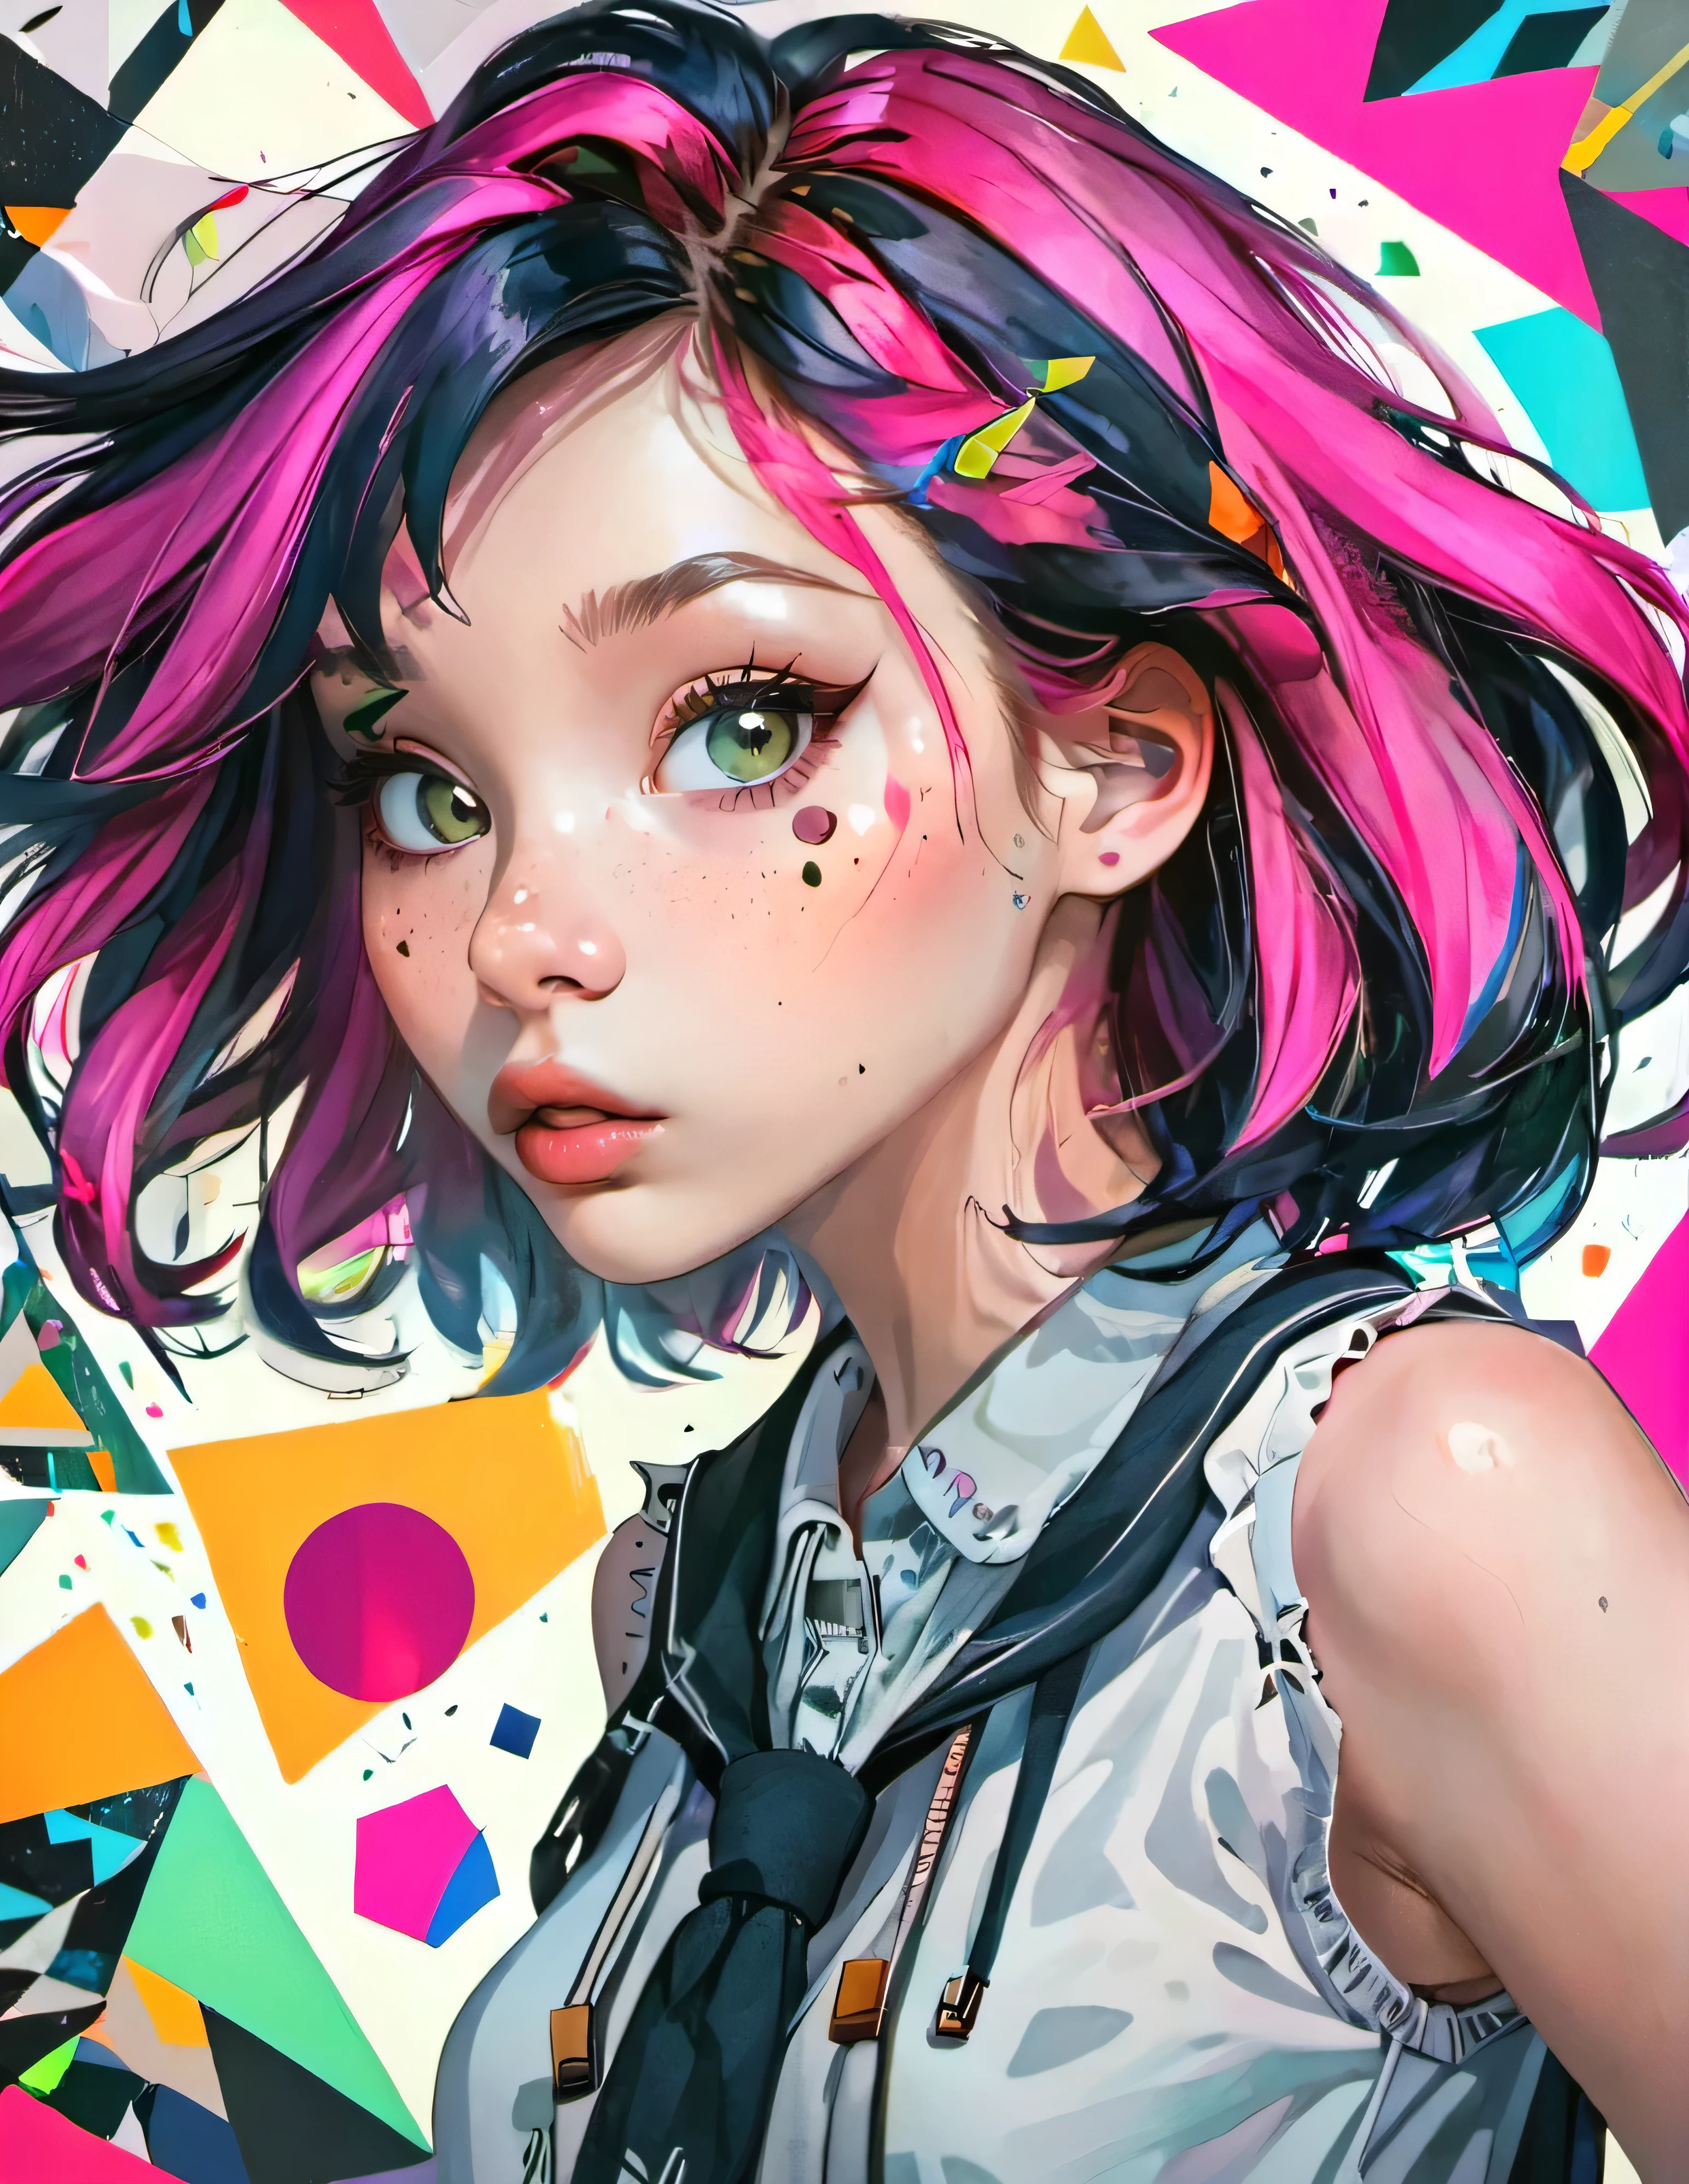 girl with a beautiful face, black and pink hair, defined details, messy school clothes, looking at the camera, "Generate an illustration in a style that blends organic shapes with geometric patterns, emphasizing vibrant colors and dynamic compositions."